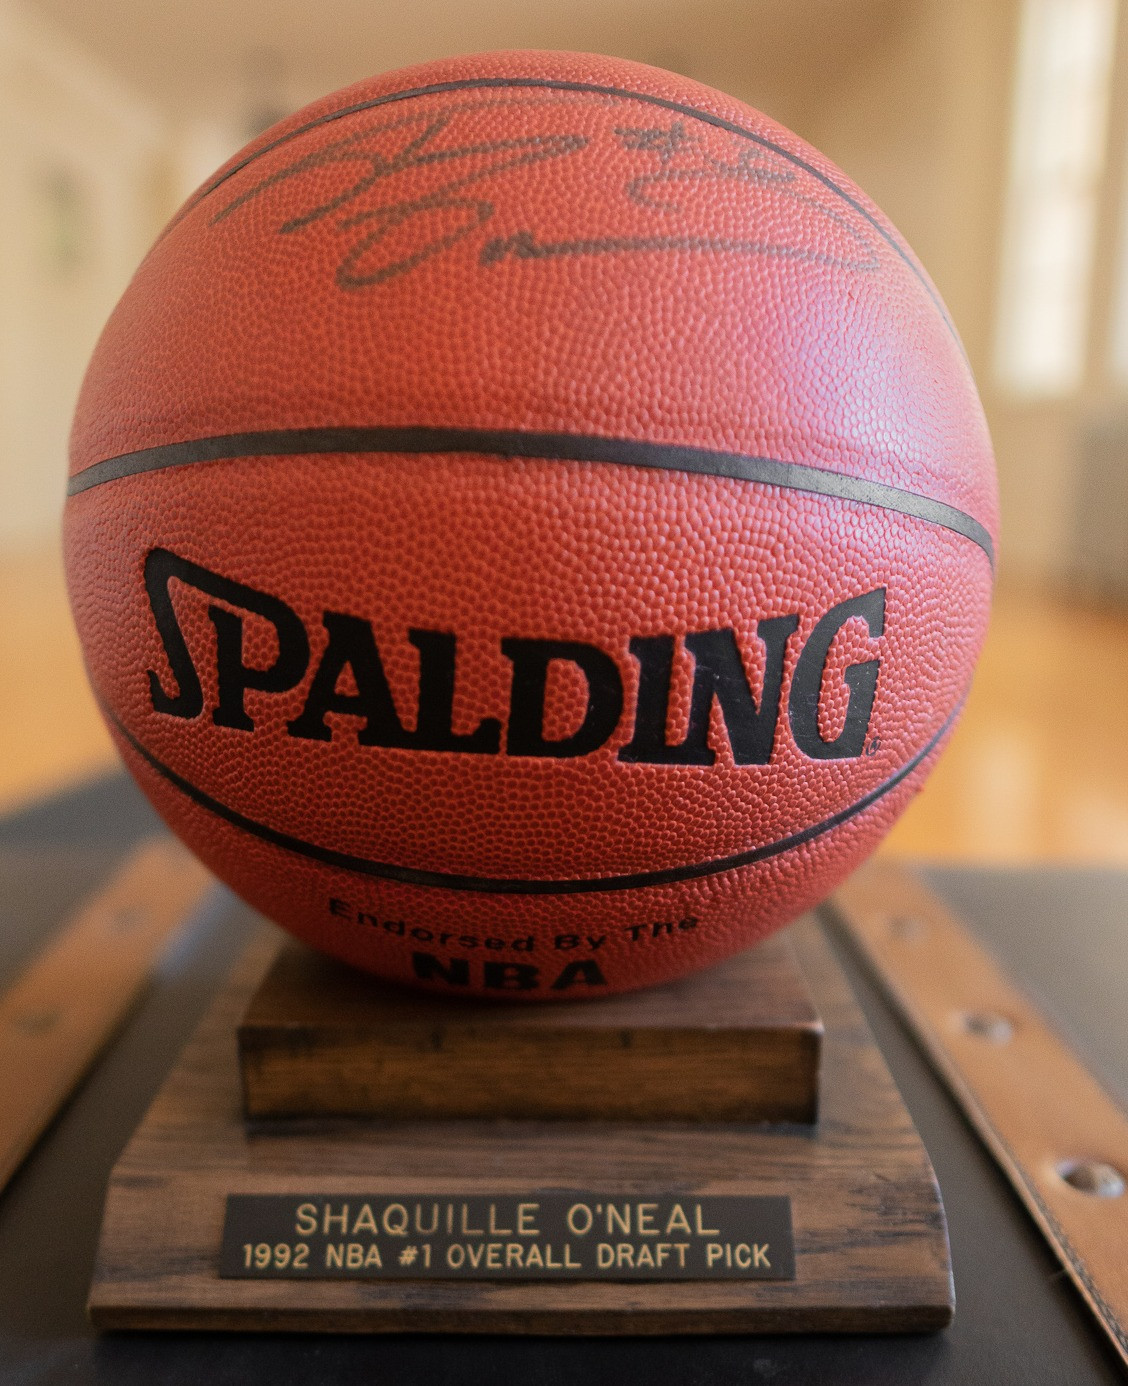 Spalding basketball autographed by Shaq. A wooden stand with an engraved plaque that reads " Shaquille O'Neal, 1992 NBA #1 Overall Draft PIck" is included.